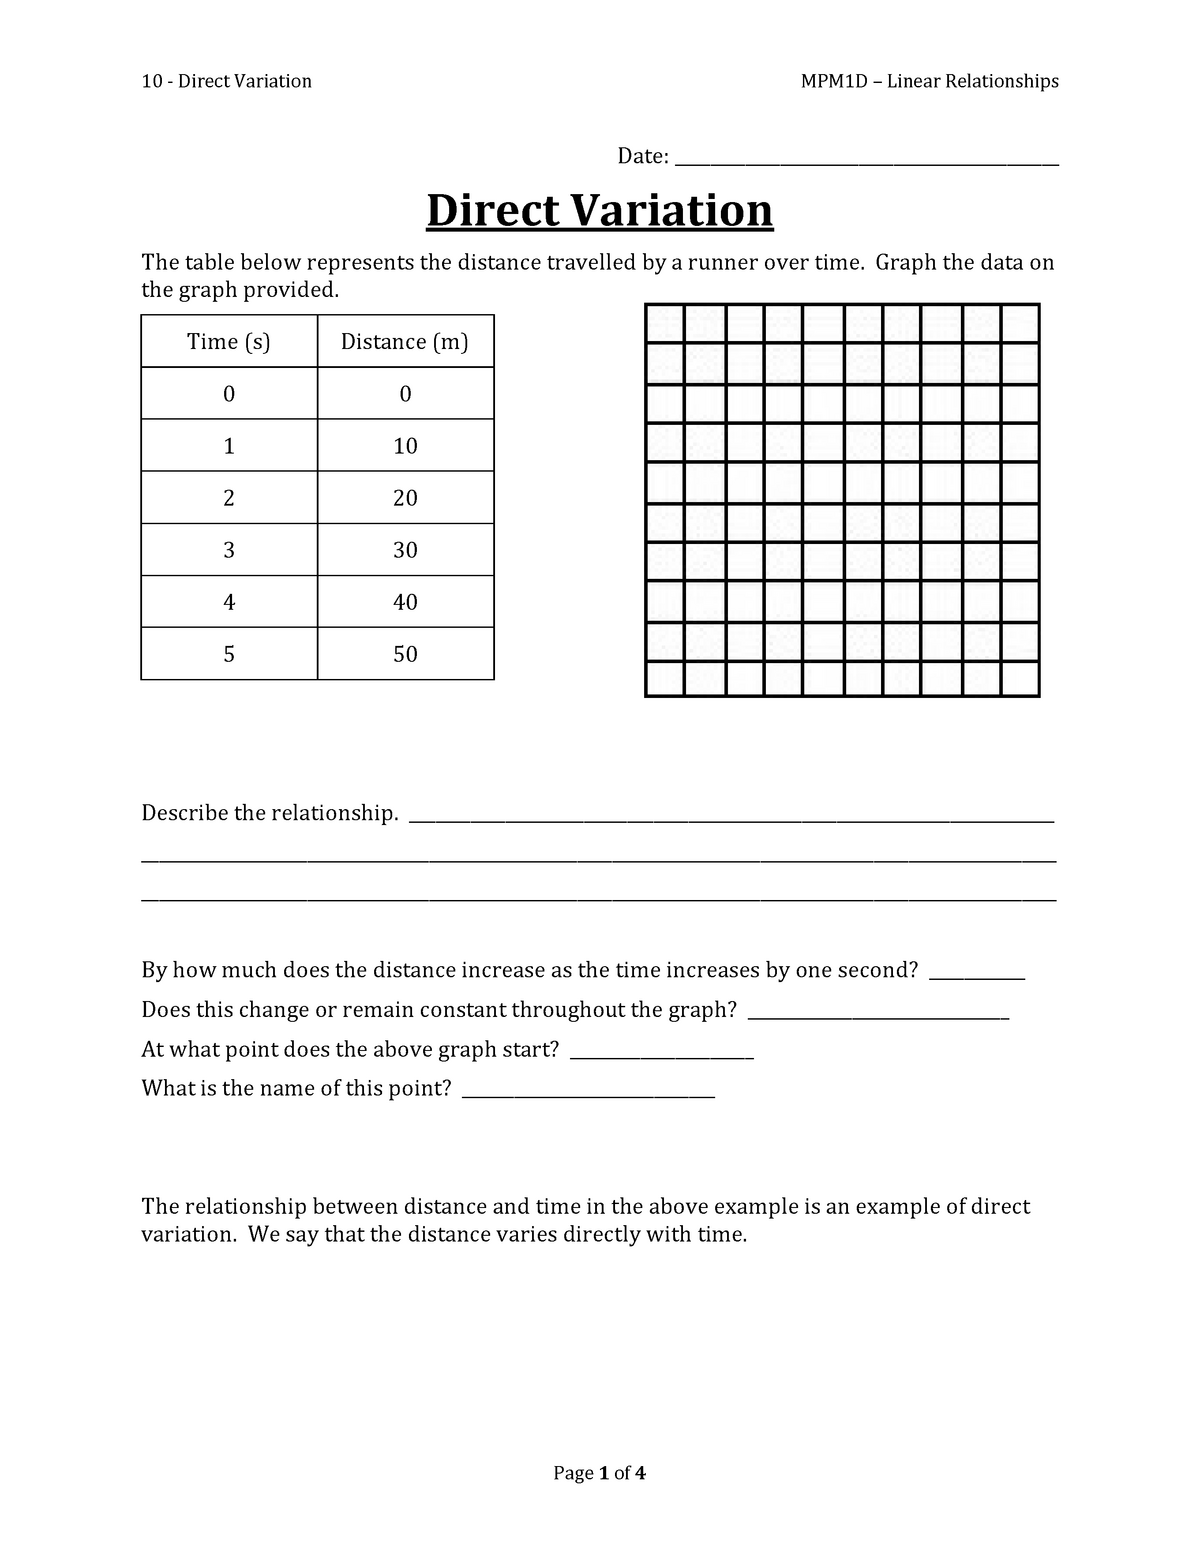 10-direct-variation-notes-date